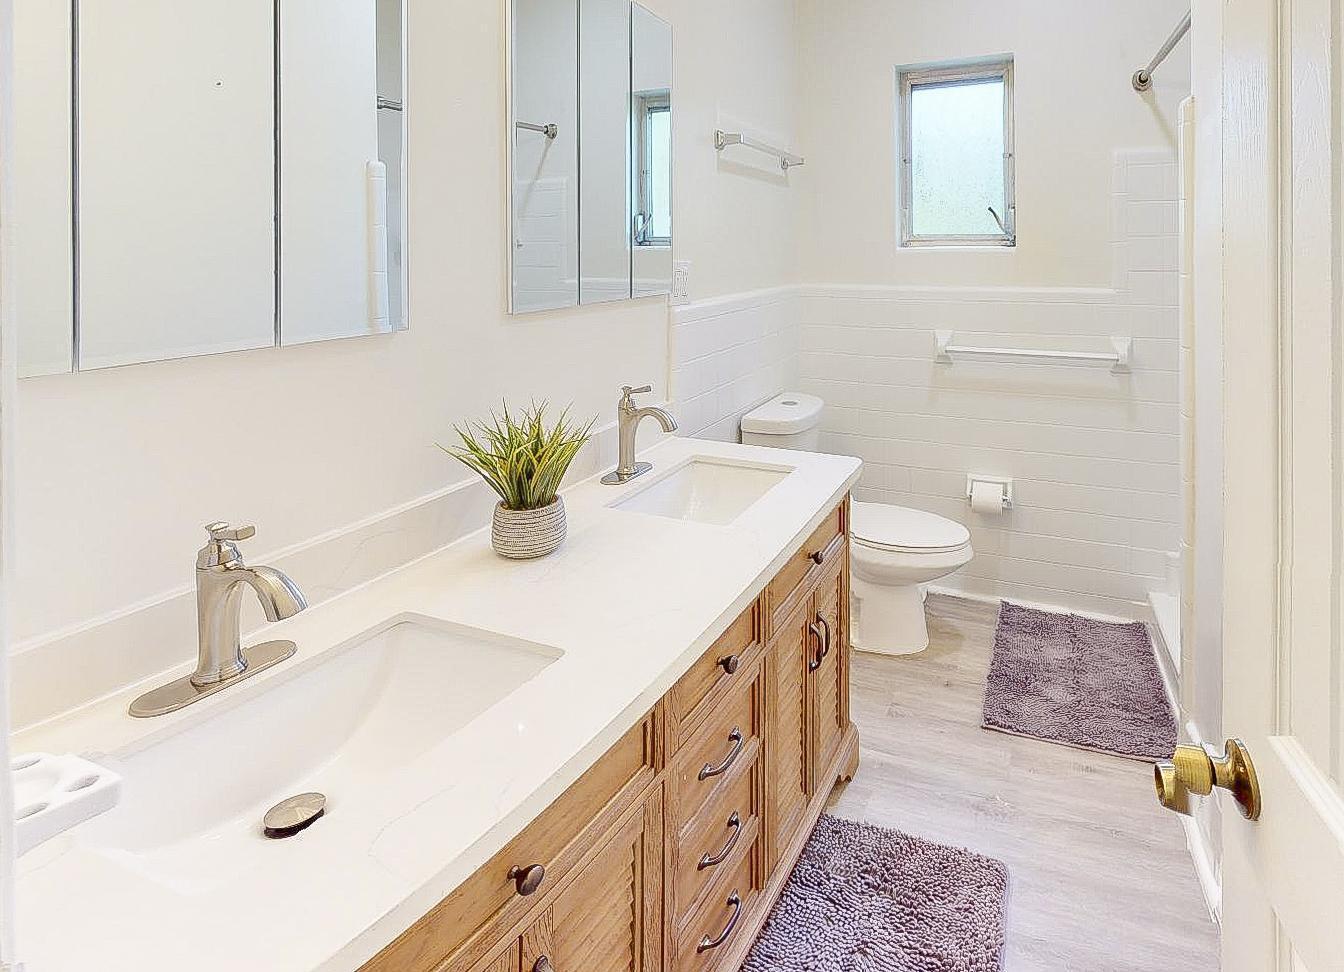 Double sinks with storage below as well